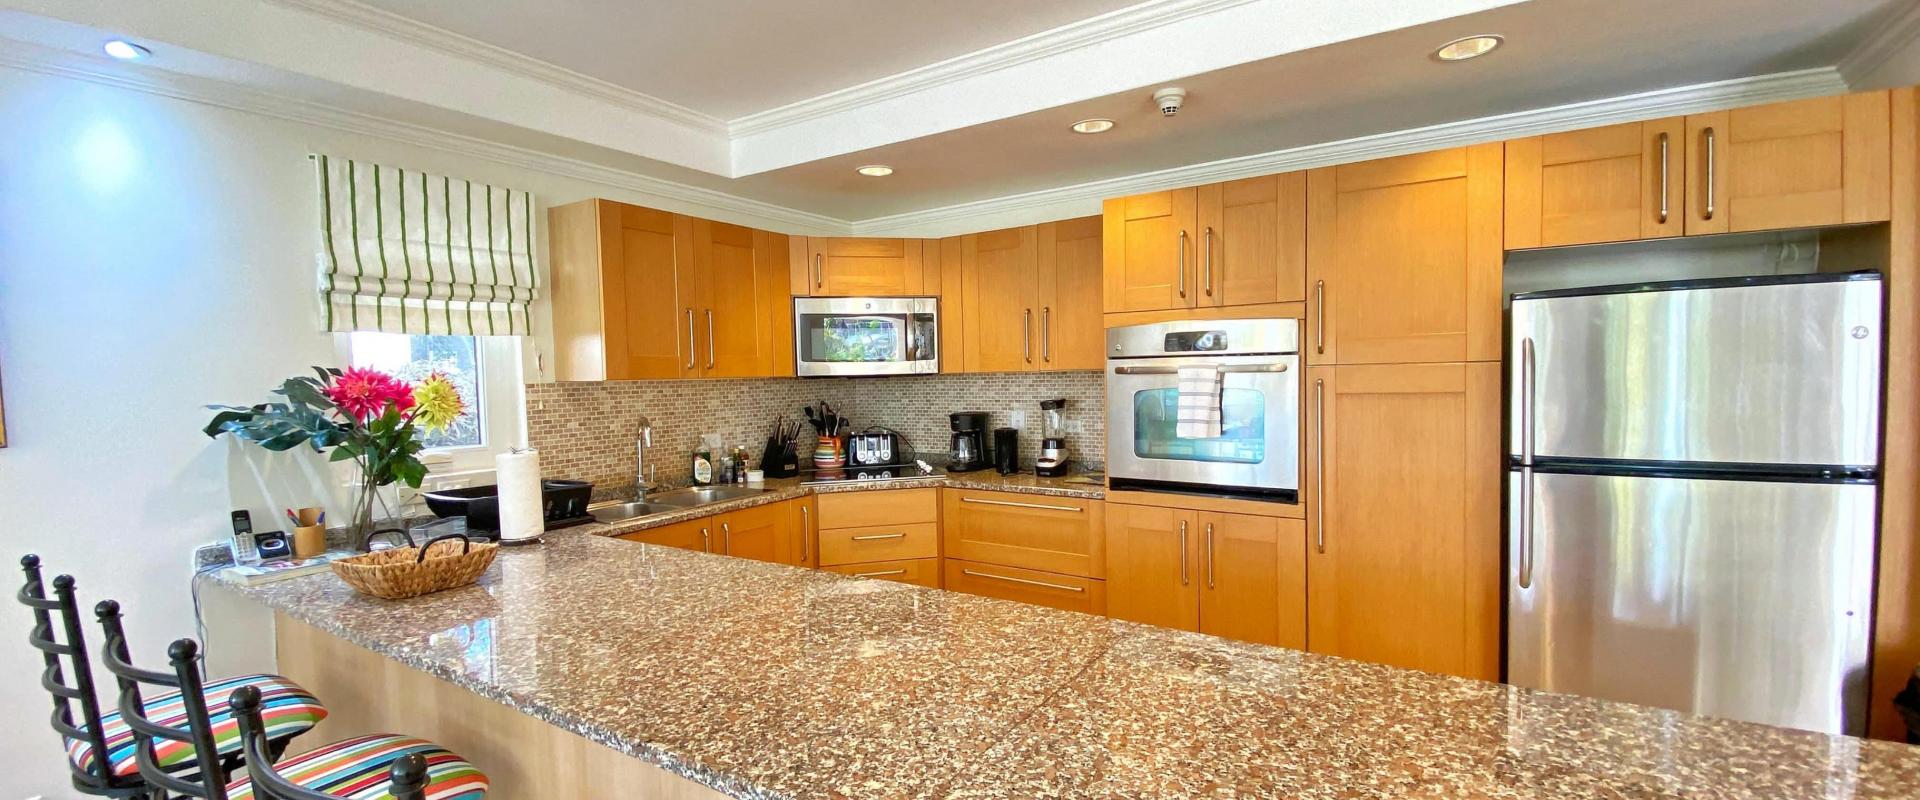 Palm Beach 211 Barbados Beachfront Vacation Condo Rental Fully Equipped Kitchen